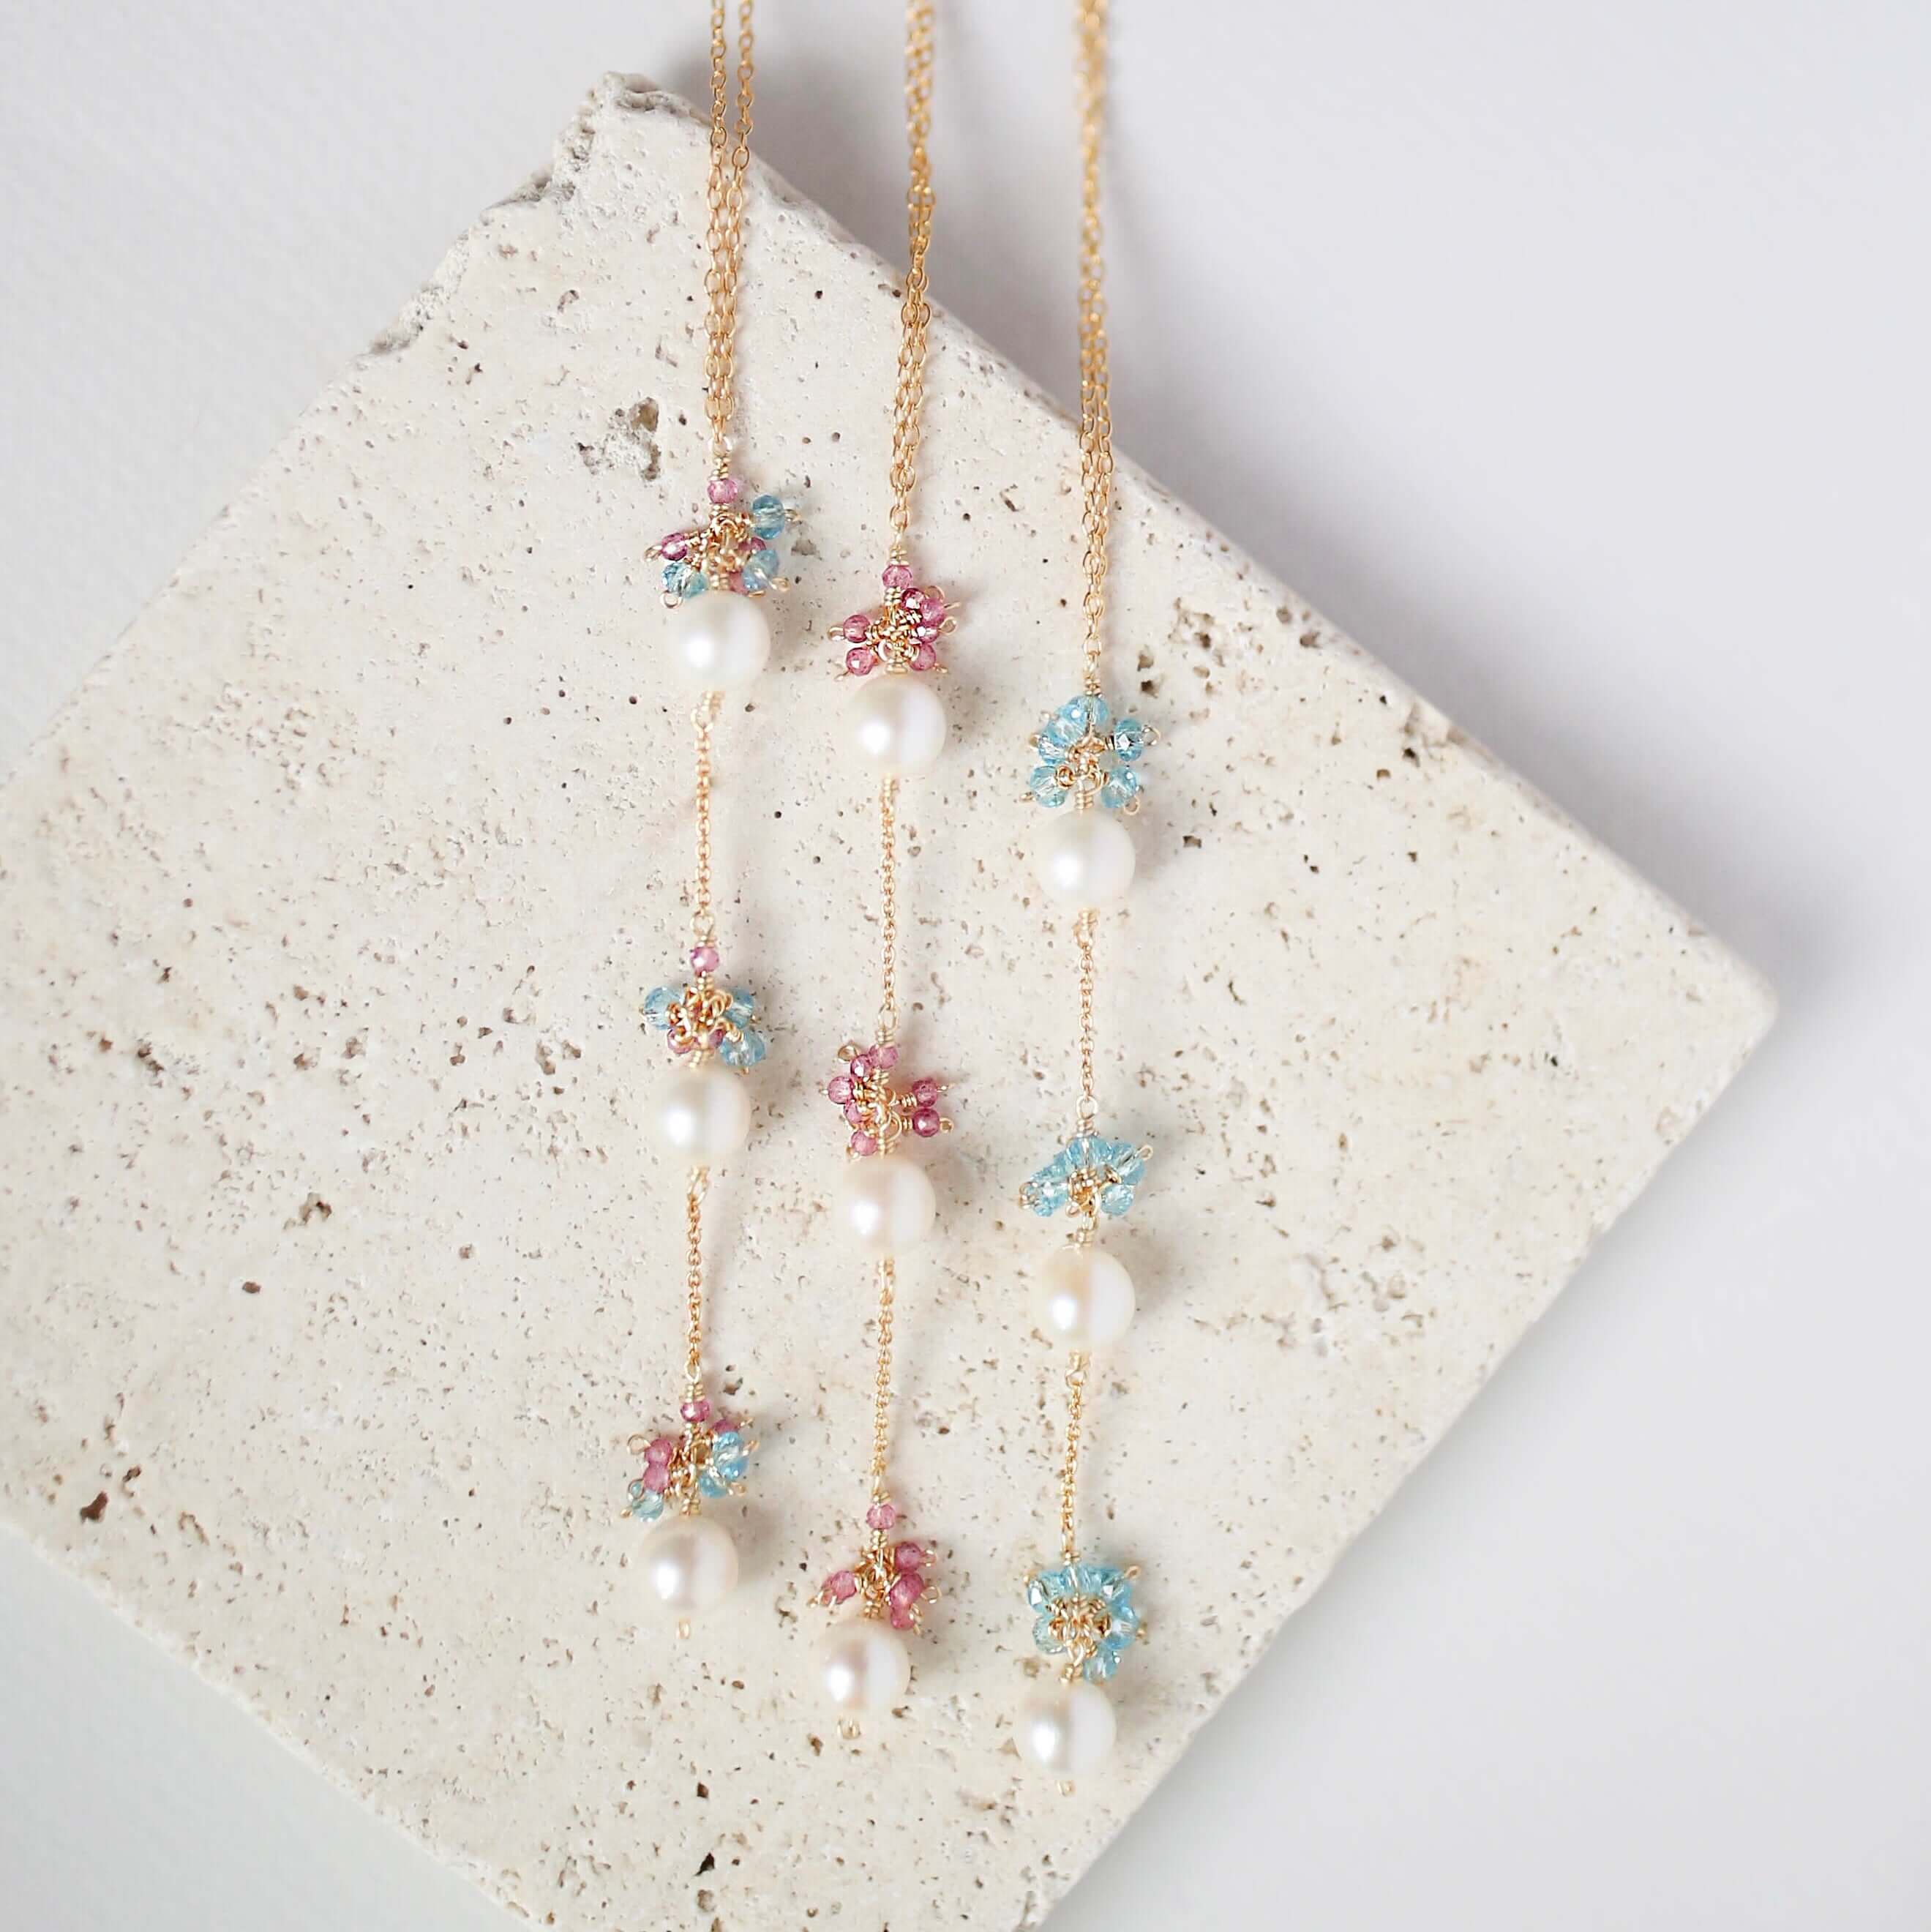 Colorful Gold plated Necklace with 3 white freshwater bead pearls paired with genuine rose quartz and aquamarine quartz gemstones